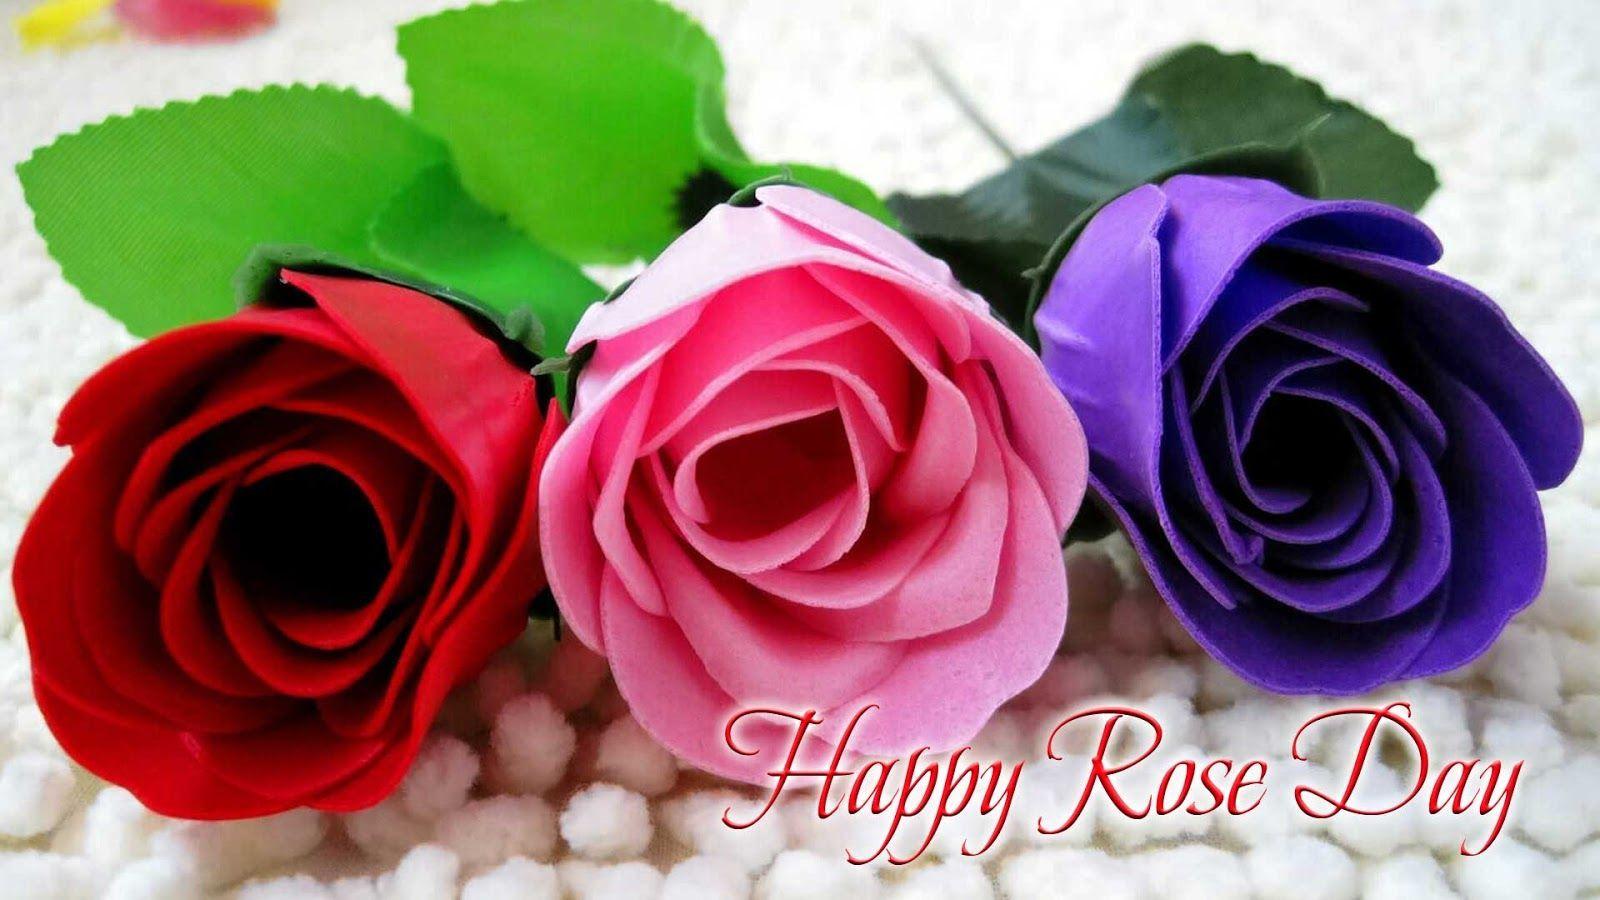 Rose Day 2016 HD Wallpaper and Red Rose Picture. Happy